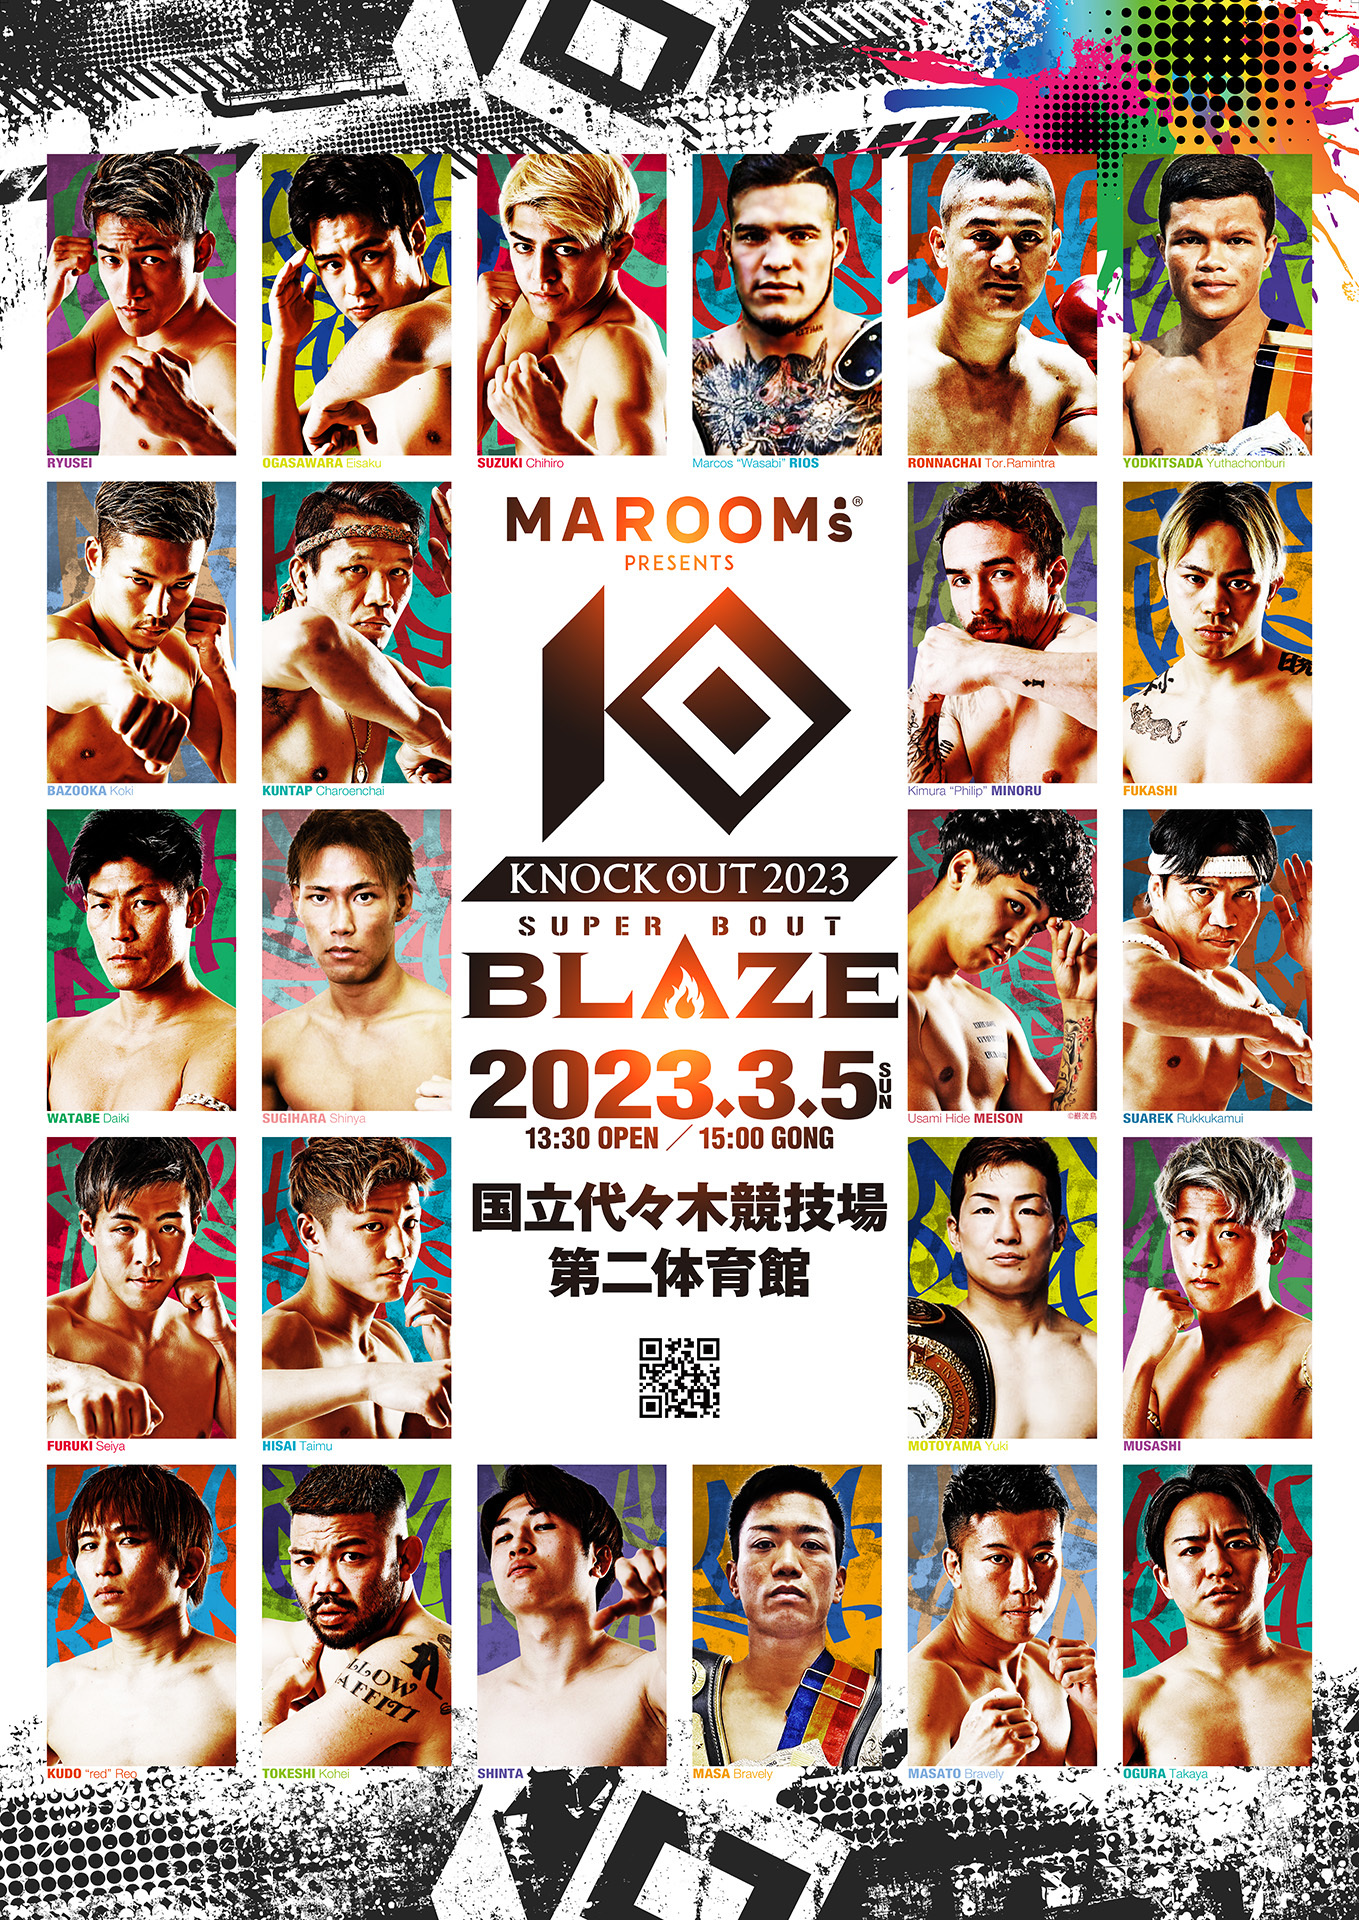 『KNOCK OUT 2023 SUPER BOUT “BLAZE”』は3月5日に開催